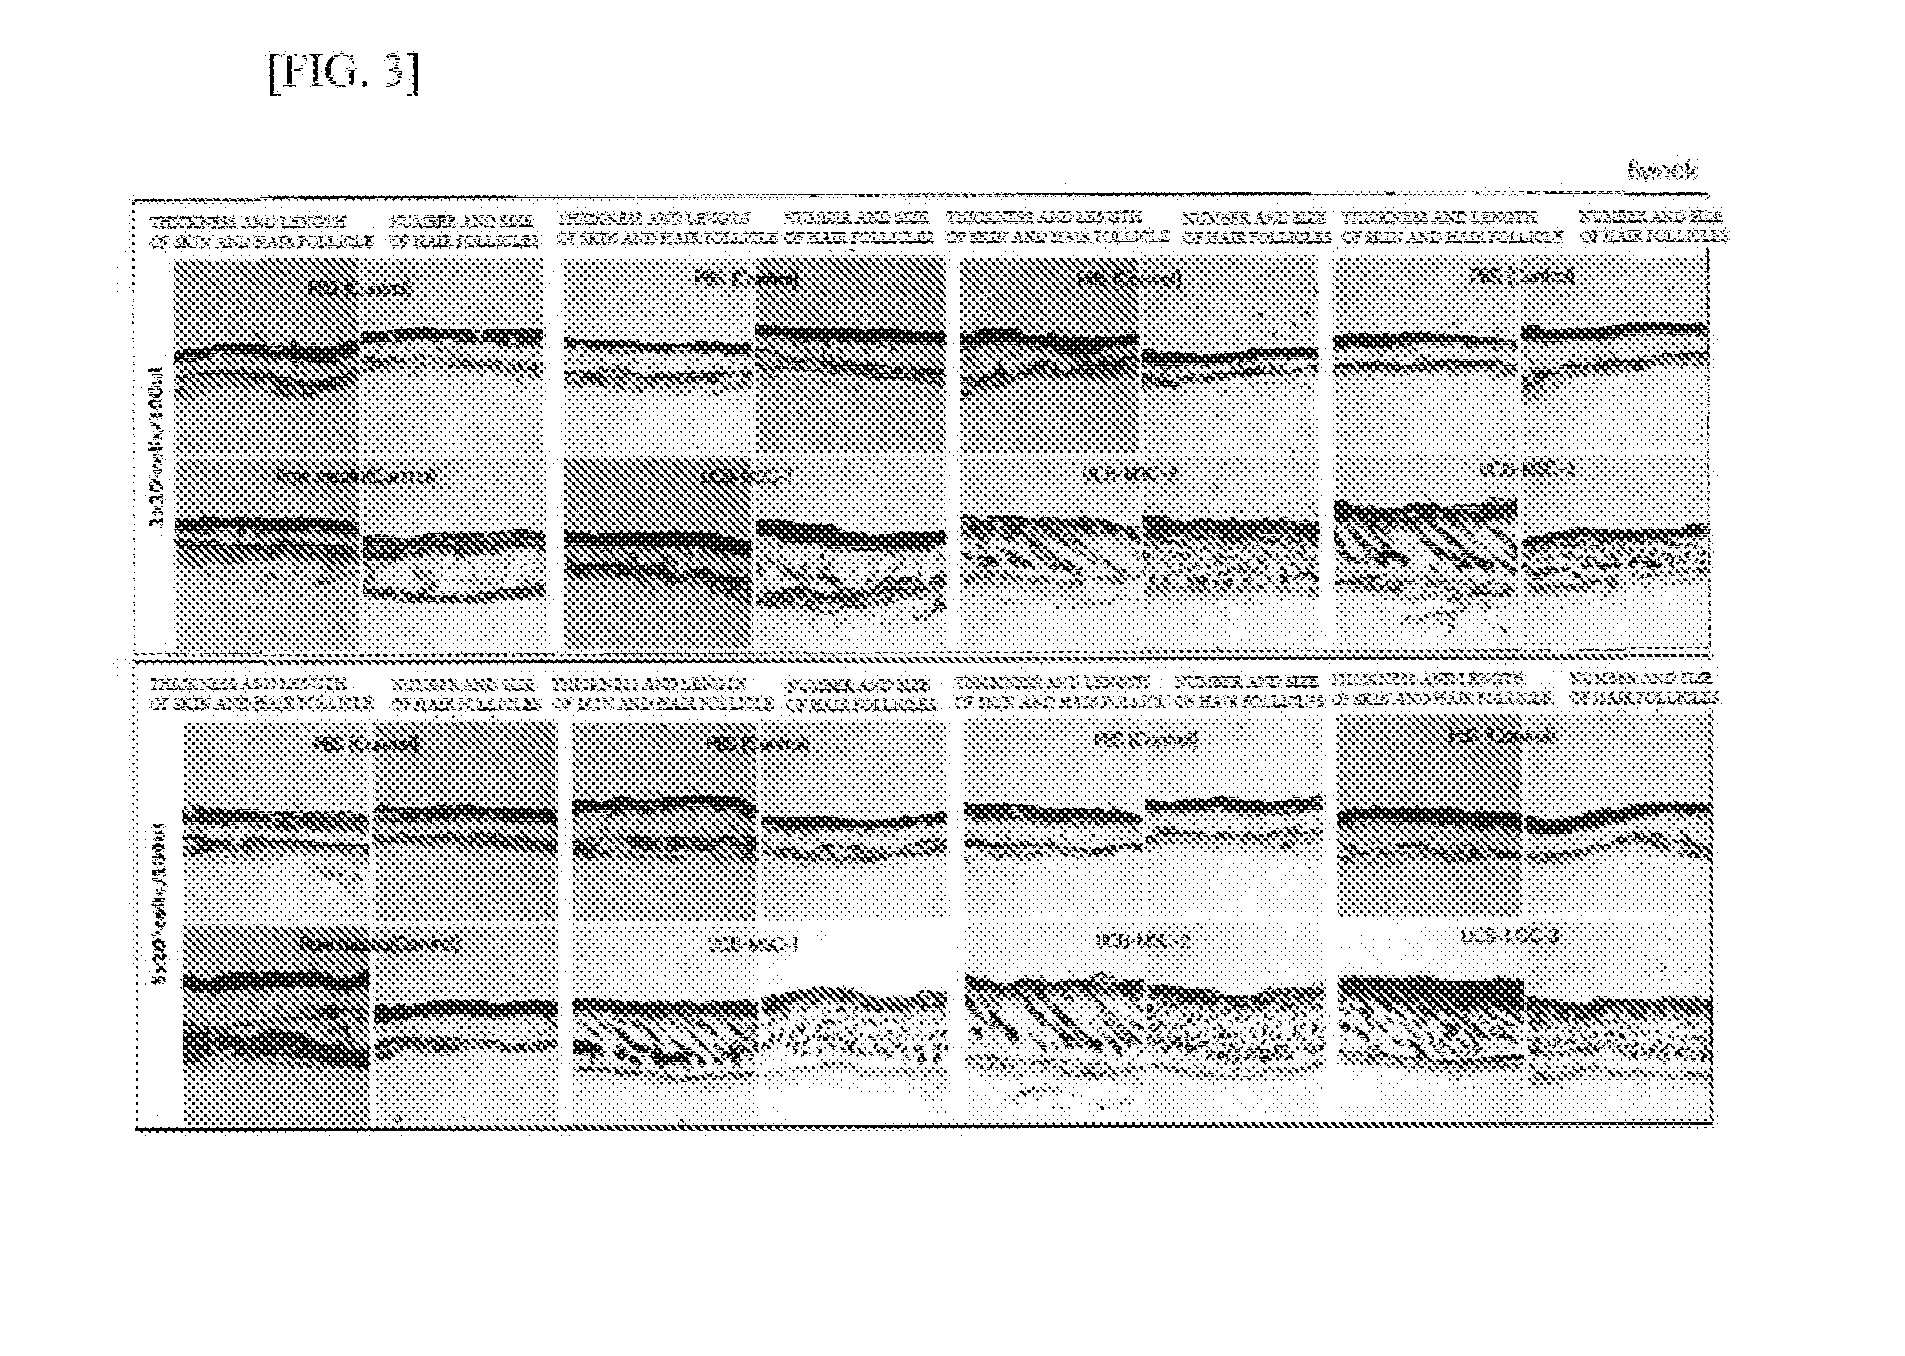 Capability of small-sized stem cells to stimulate hair growth and use thereof